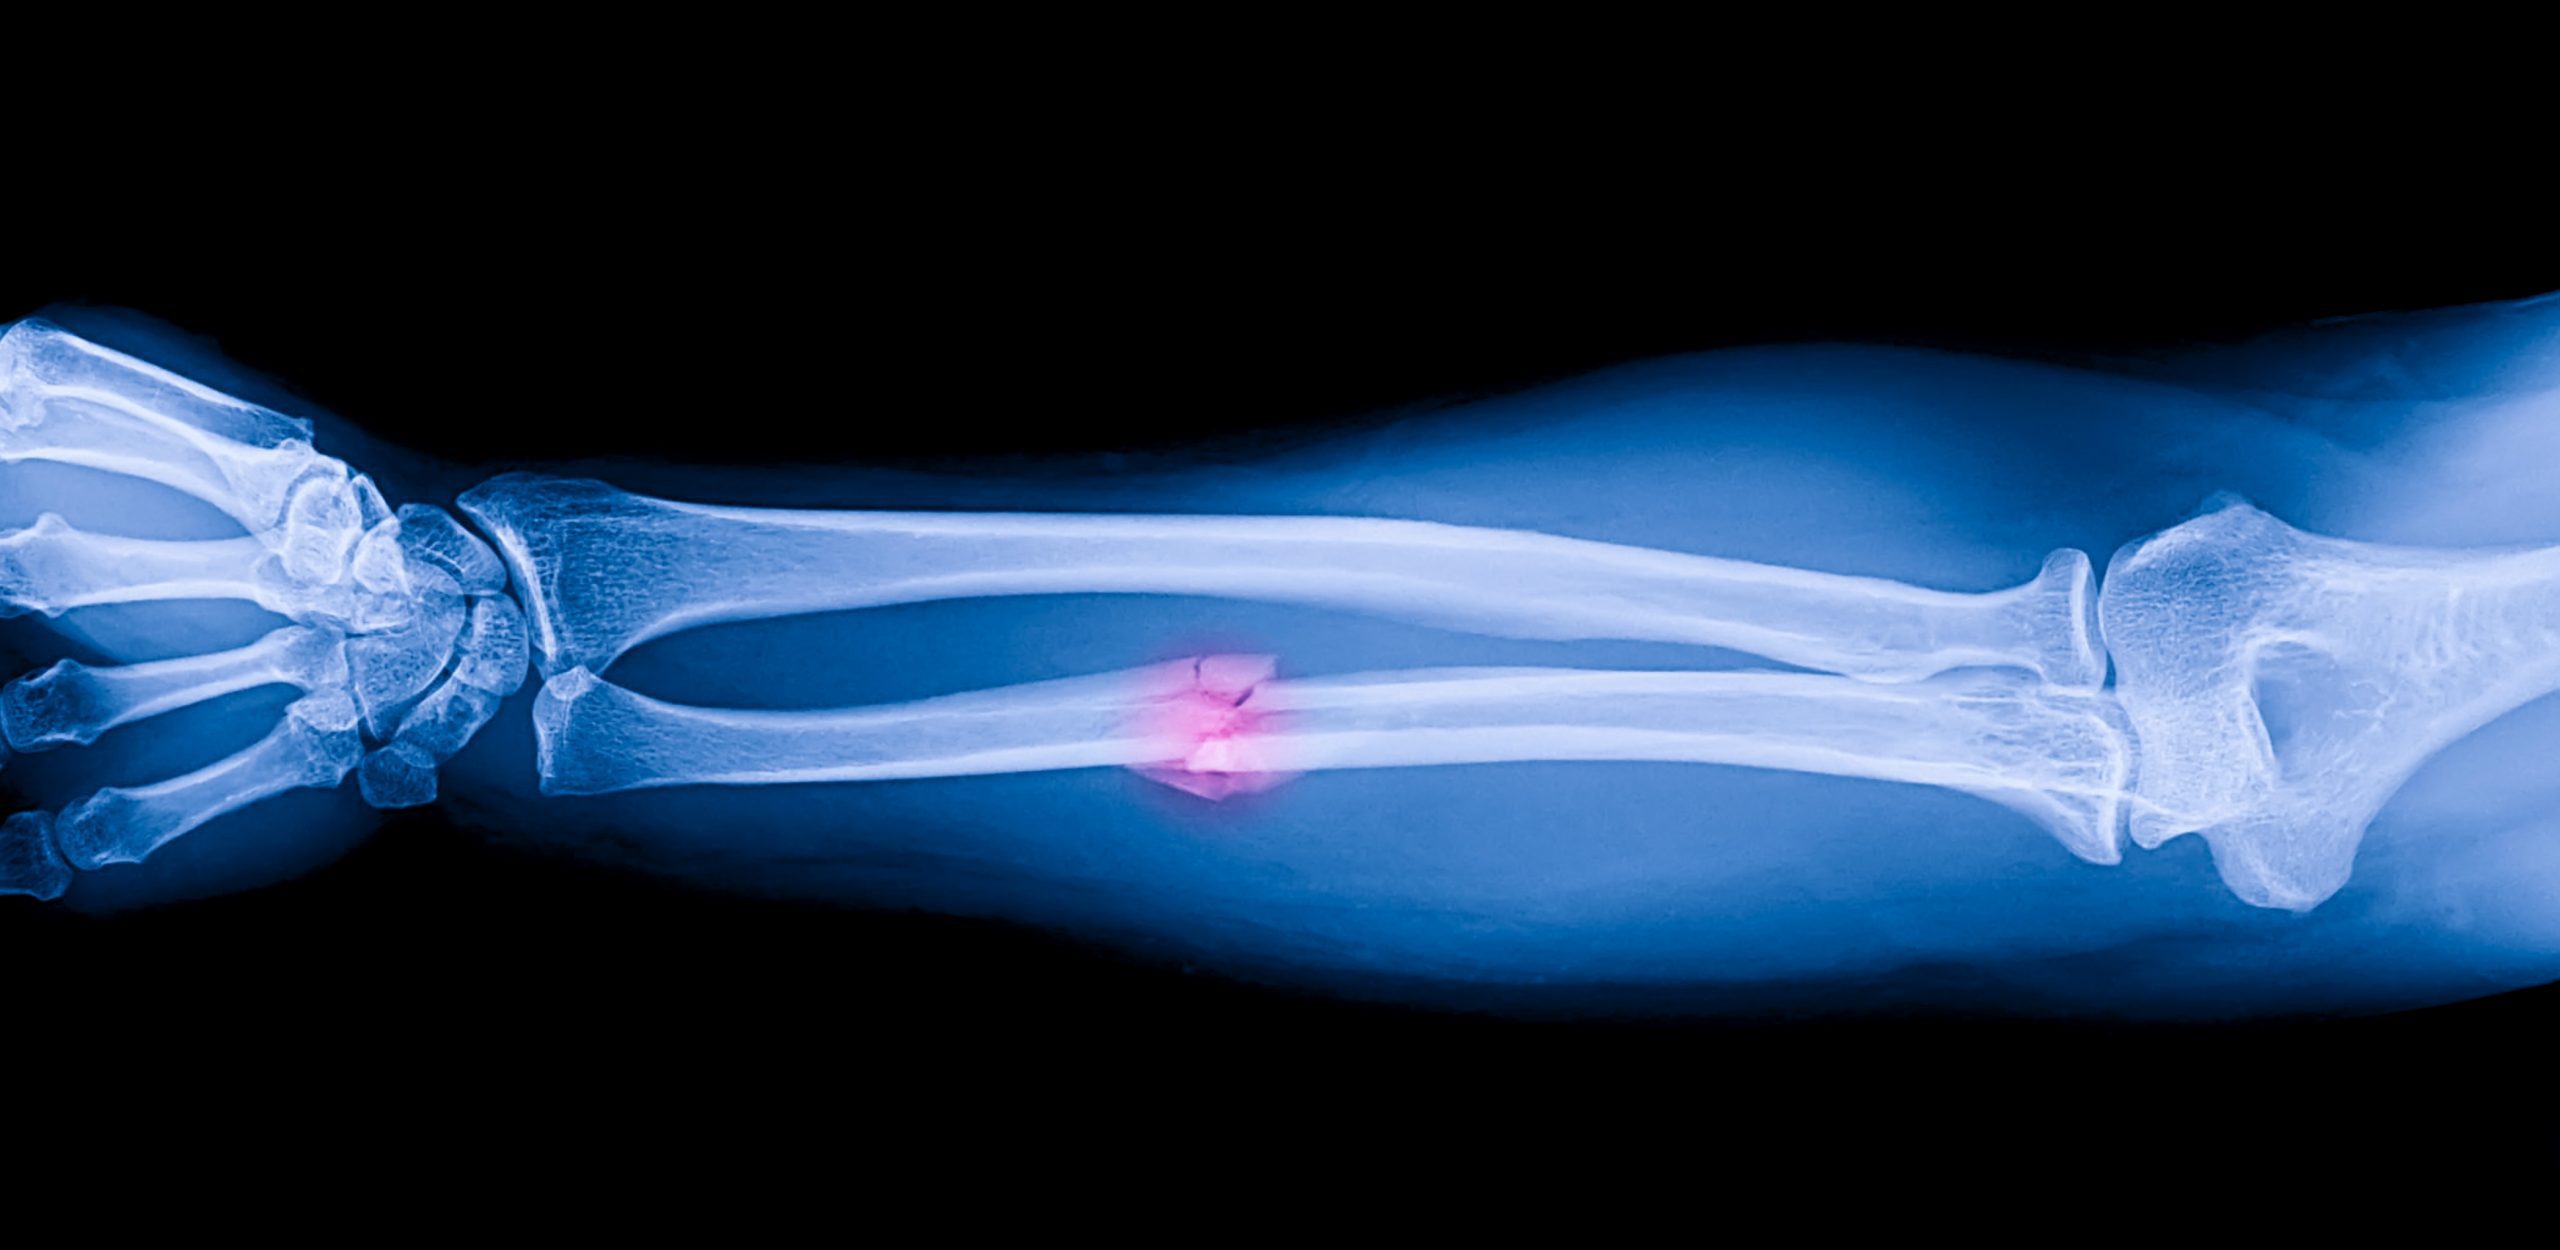 X-ray image showing a break in one of the bones in the middle of the forearm.